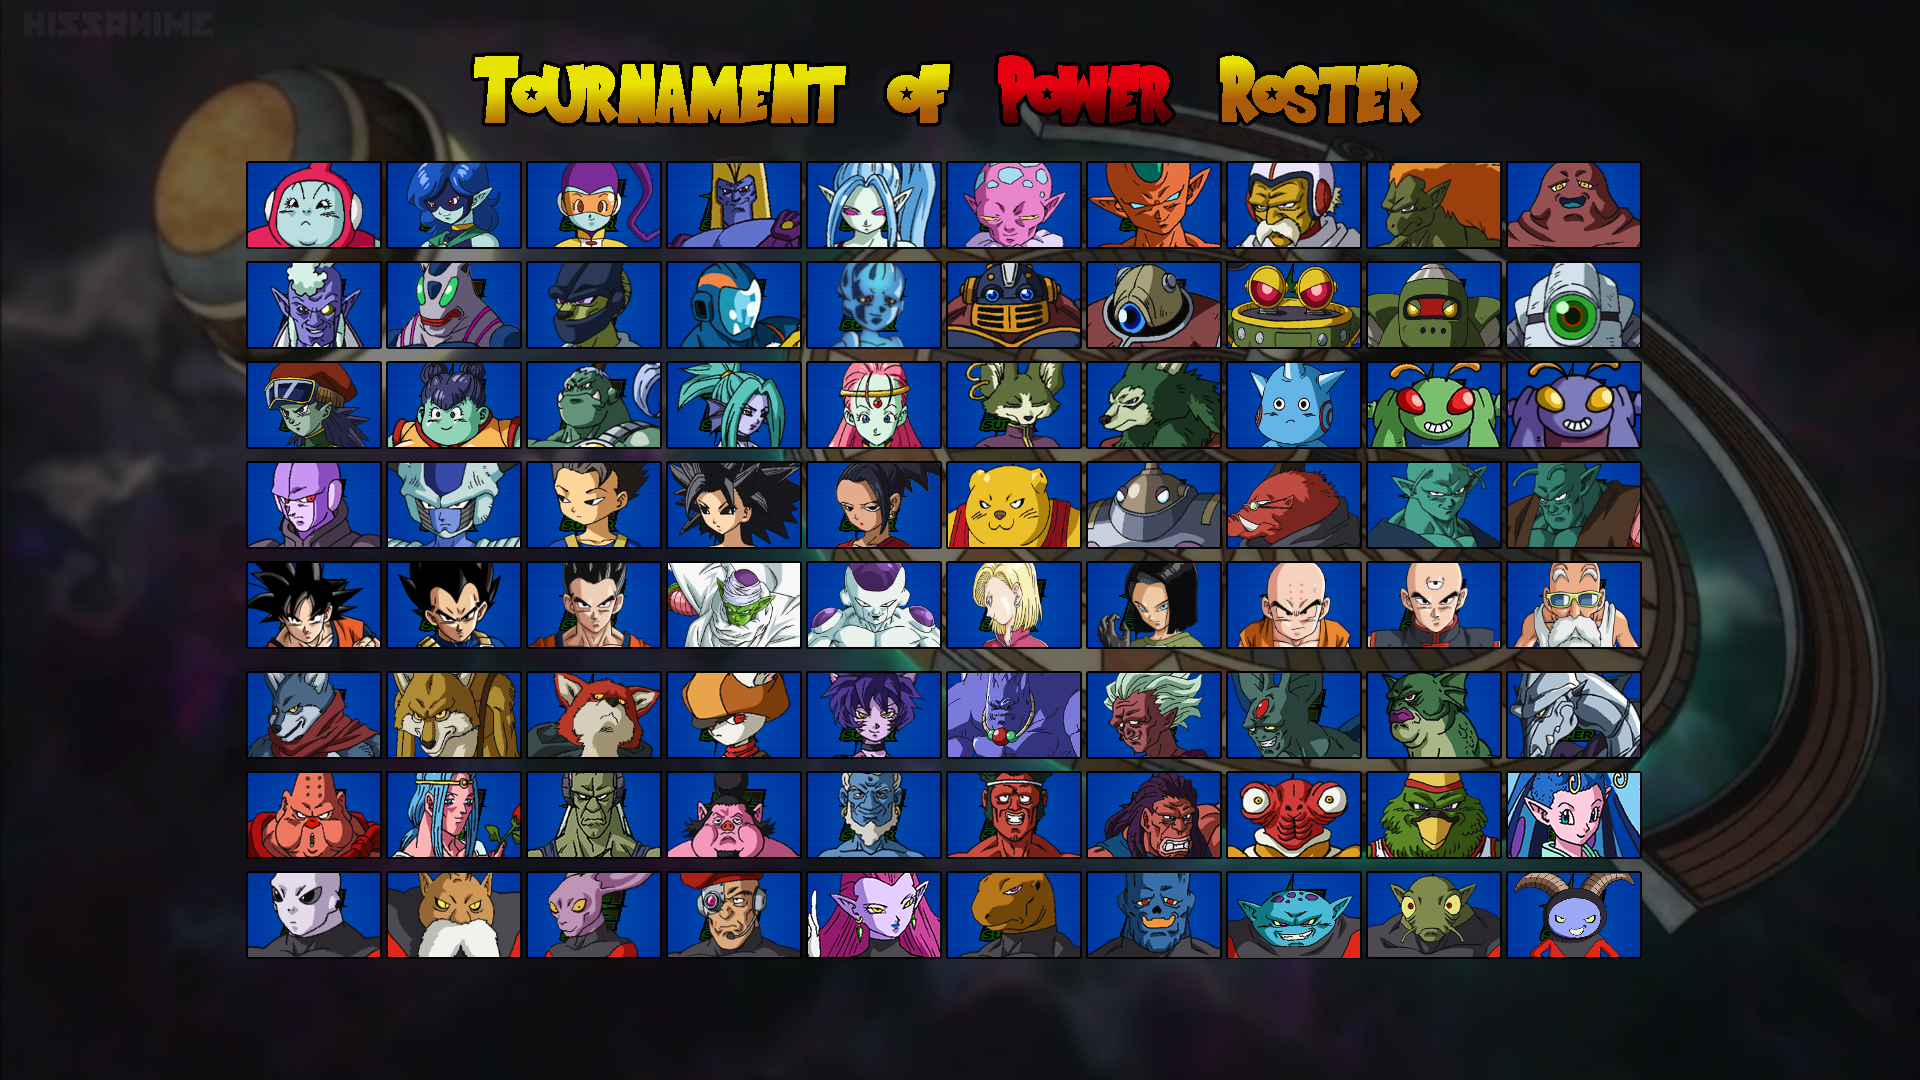 dragon_ball_super__tournament_of_power_roster_by_zyphyris-db1bd85.png